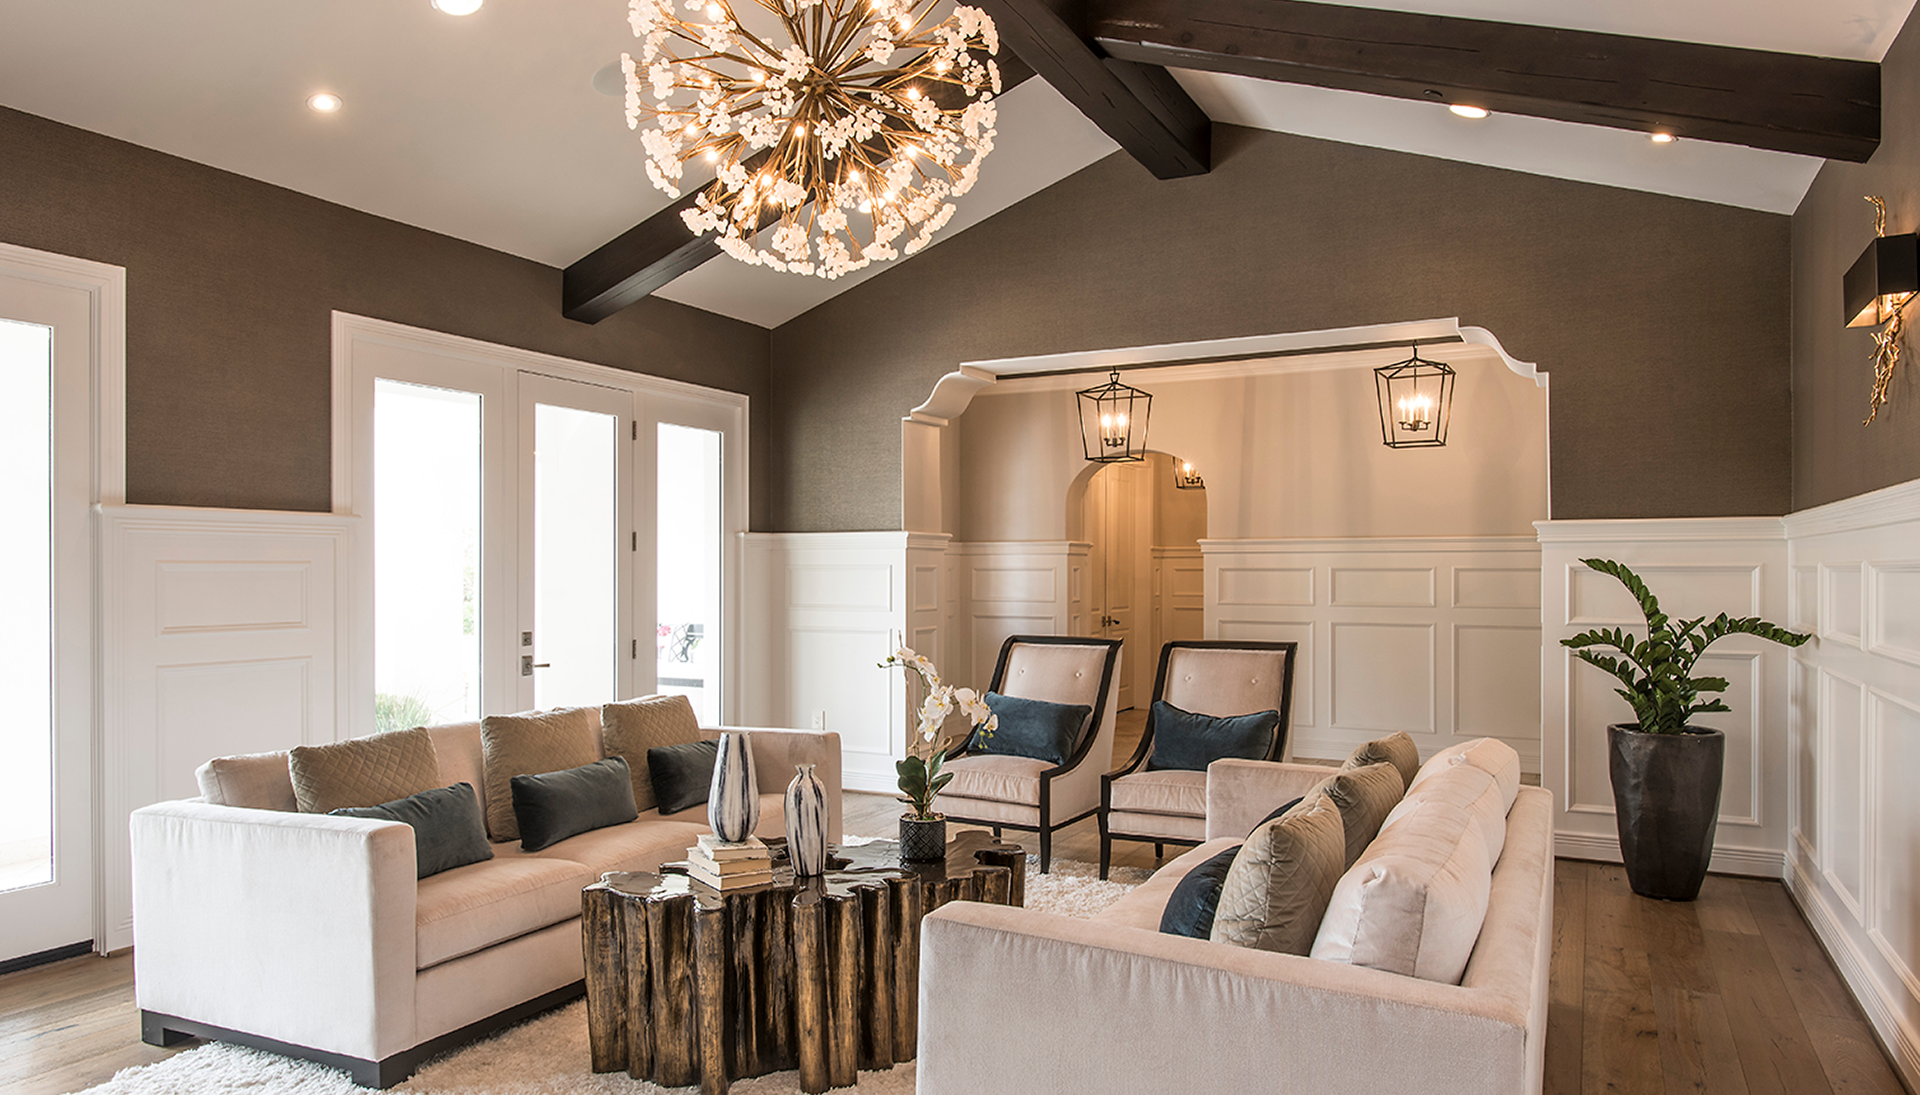 Modern living room with neutral tones, featuring a large chandelier, exposed dark beams, two beige sofas, and wooden coffee table. The room has white wainscoting, recessed lighting, and decorative plants.